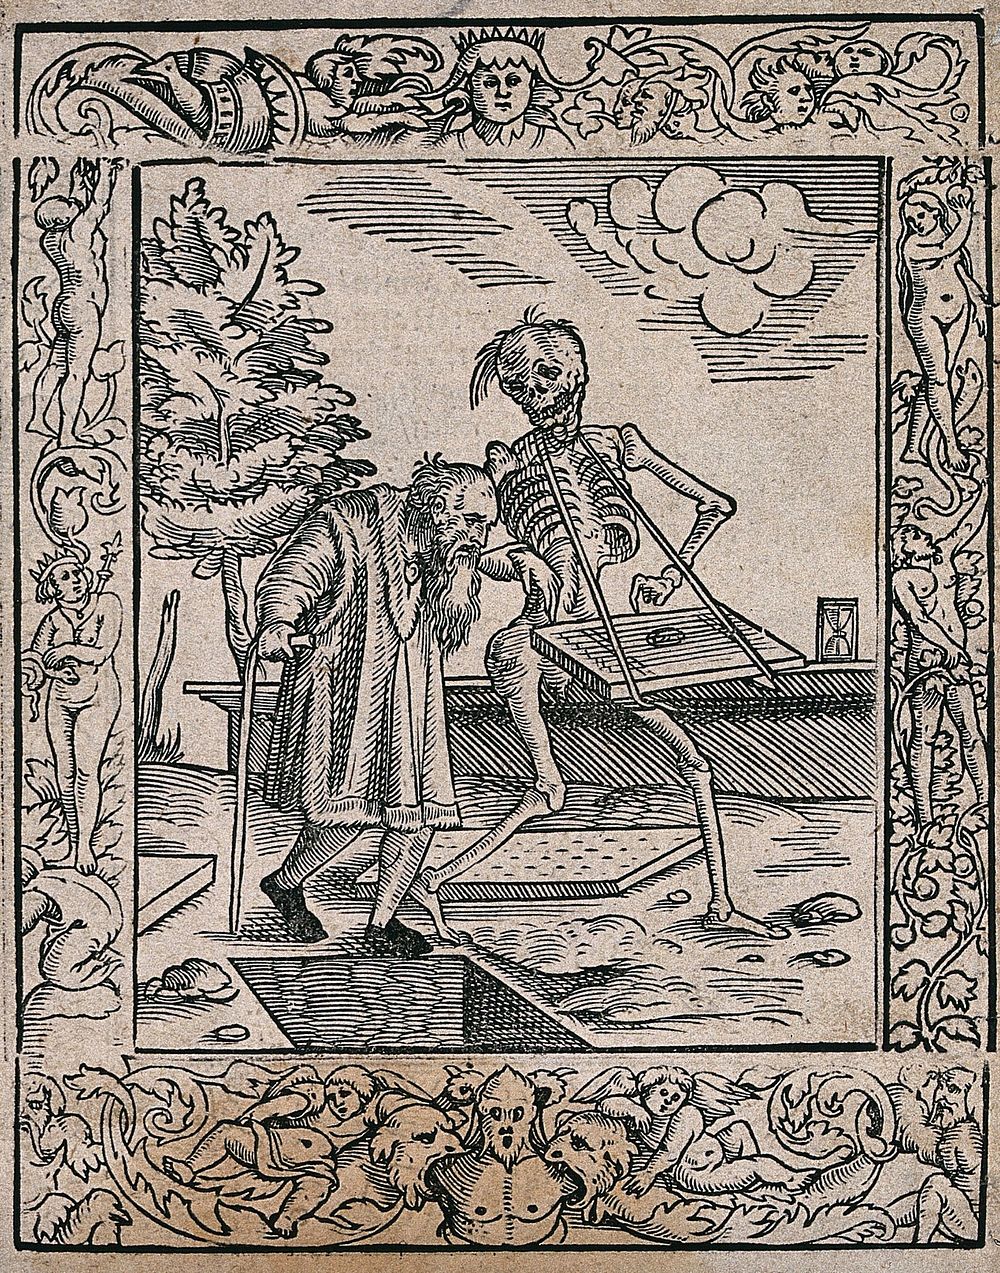 The dance of death: the old man. Woodcut after Hans Holbein the younger.